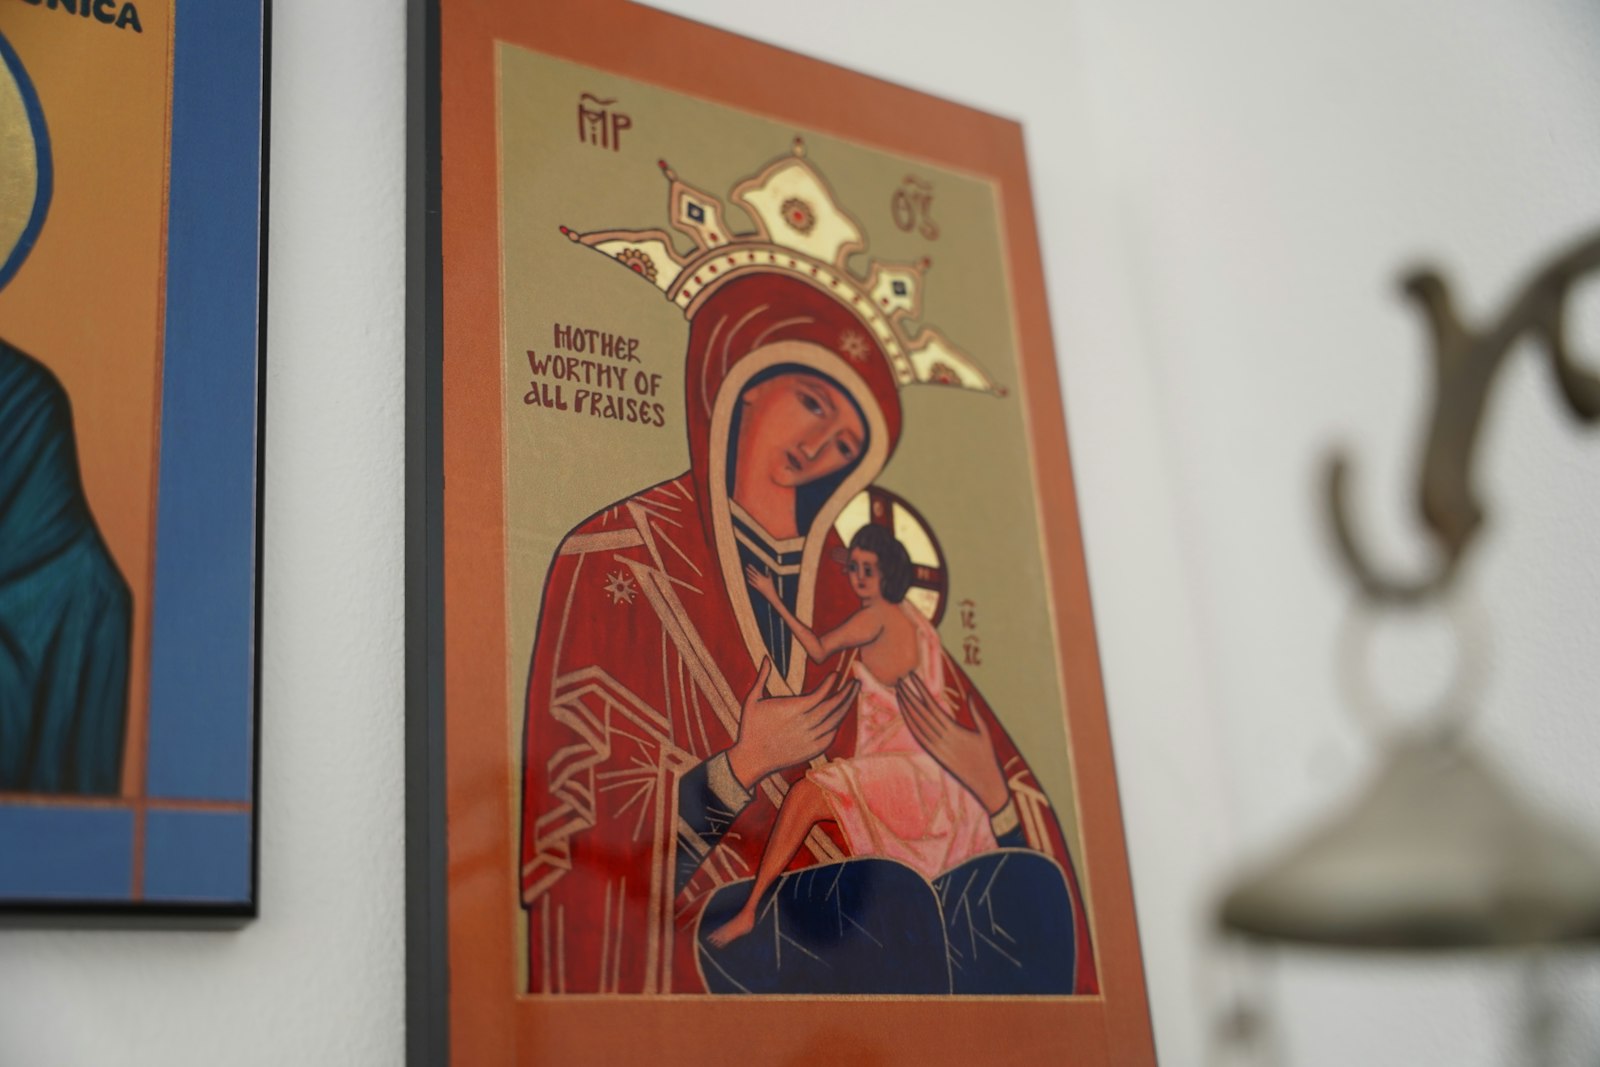 An icon of Mary, Mother Worthy of All Praises. Crombie explains in iconography, Mary is depicted with three stars, one on her head and one on each shoulder, signifying her virginity before, during and after the birth of Christ.